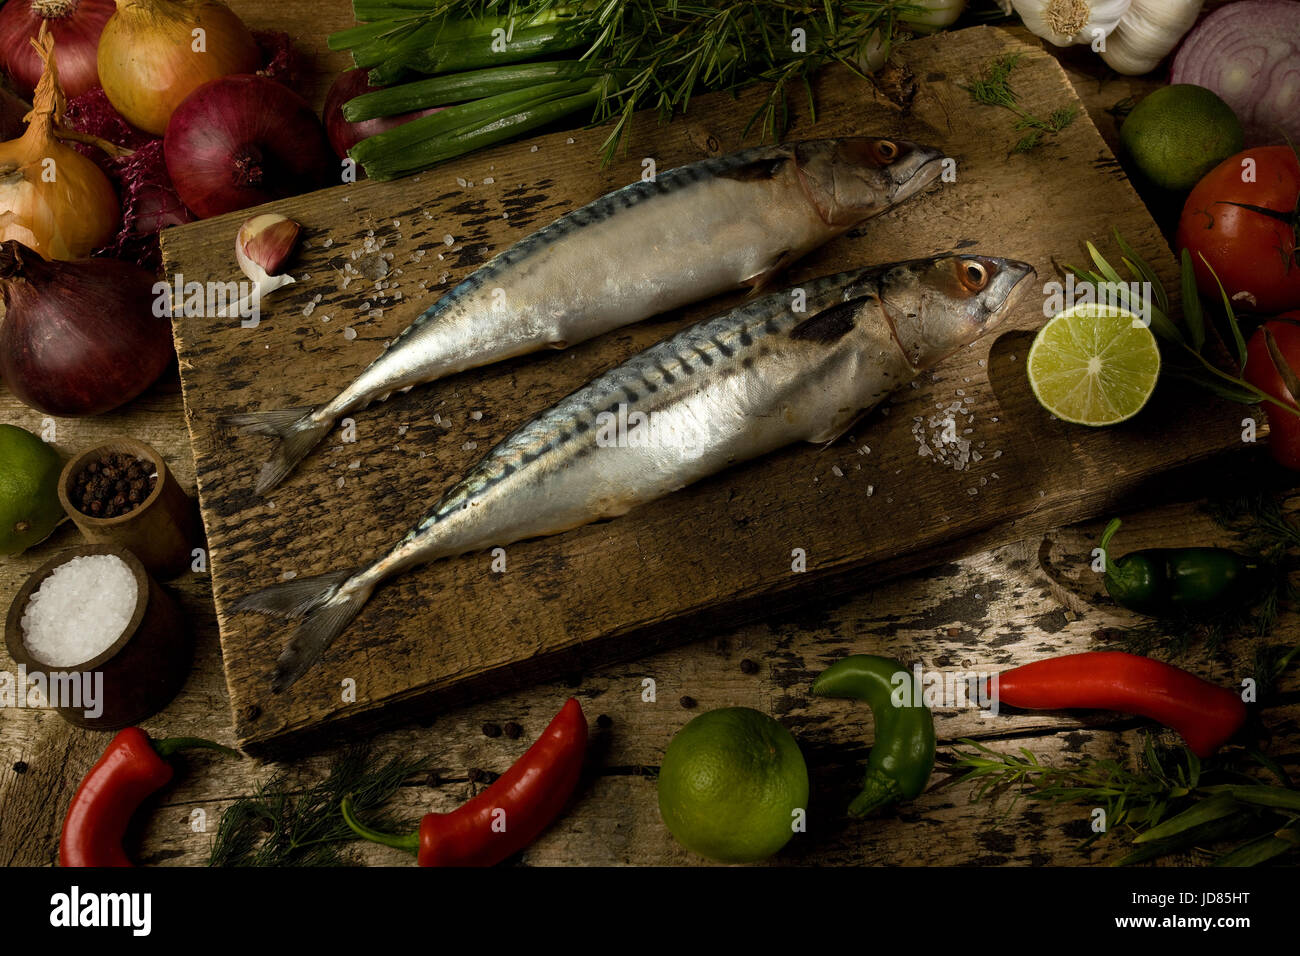 Two whole mackerel on chopping board with raw ingredients Stock Photo